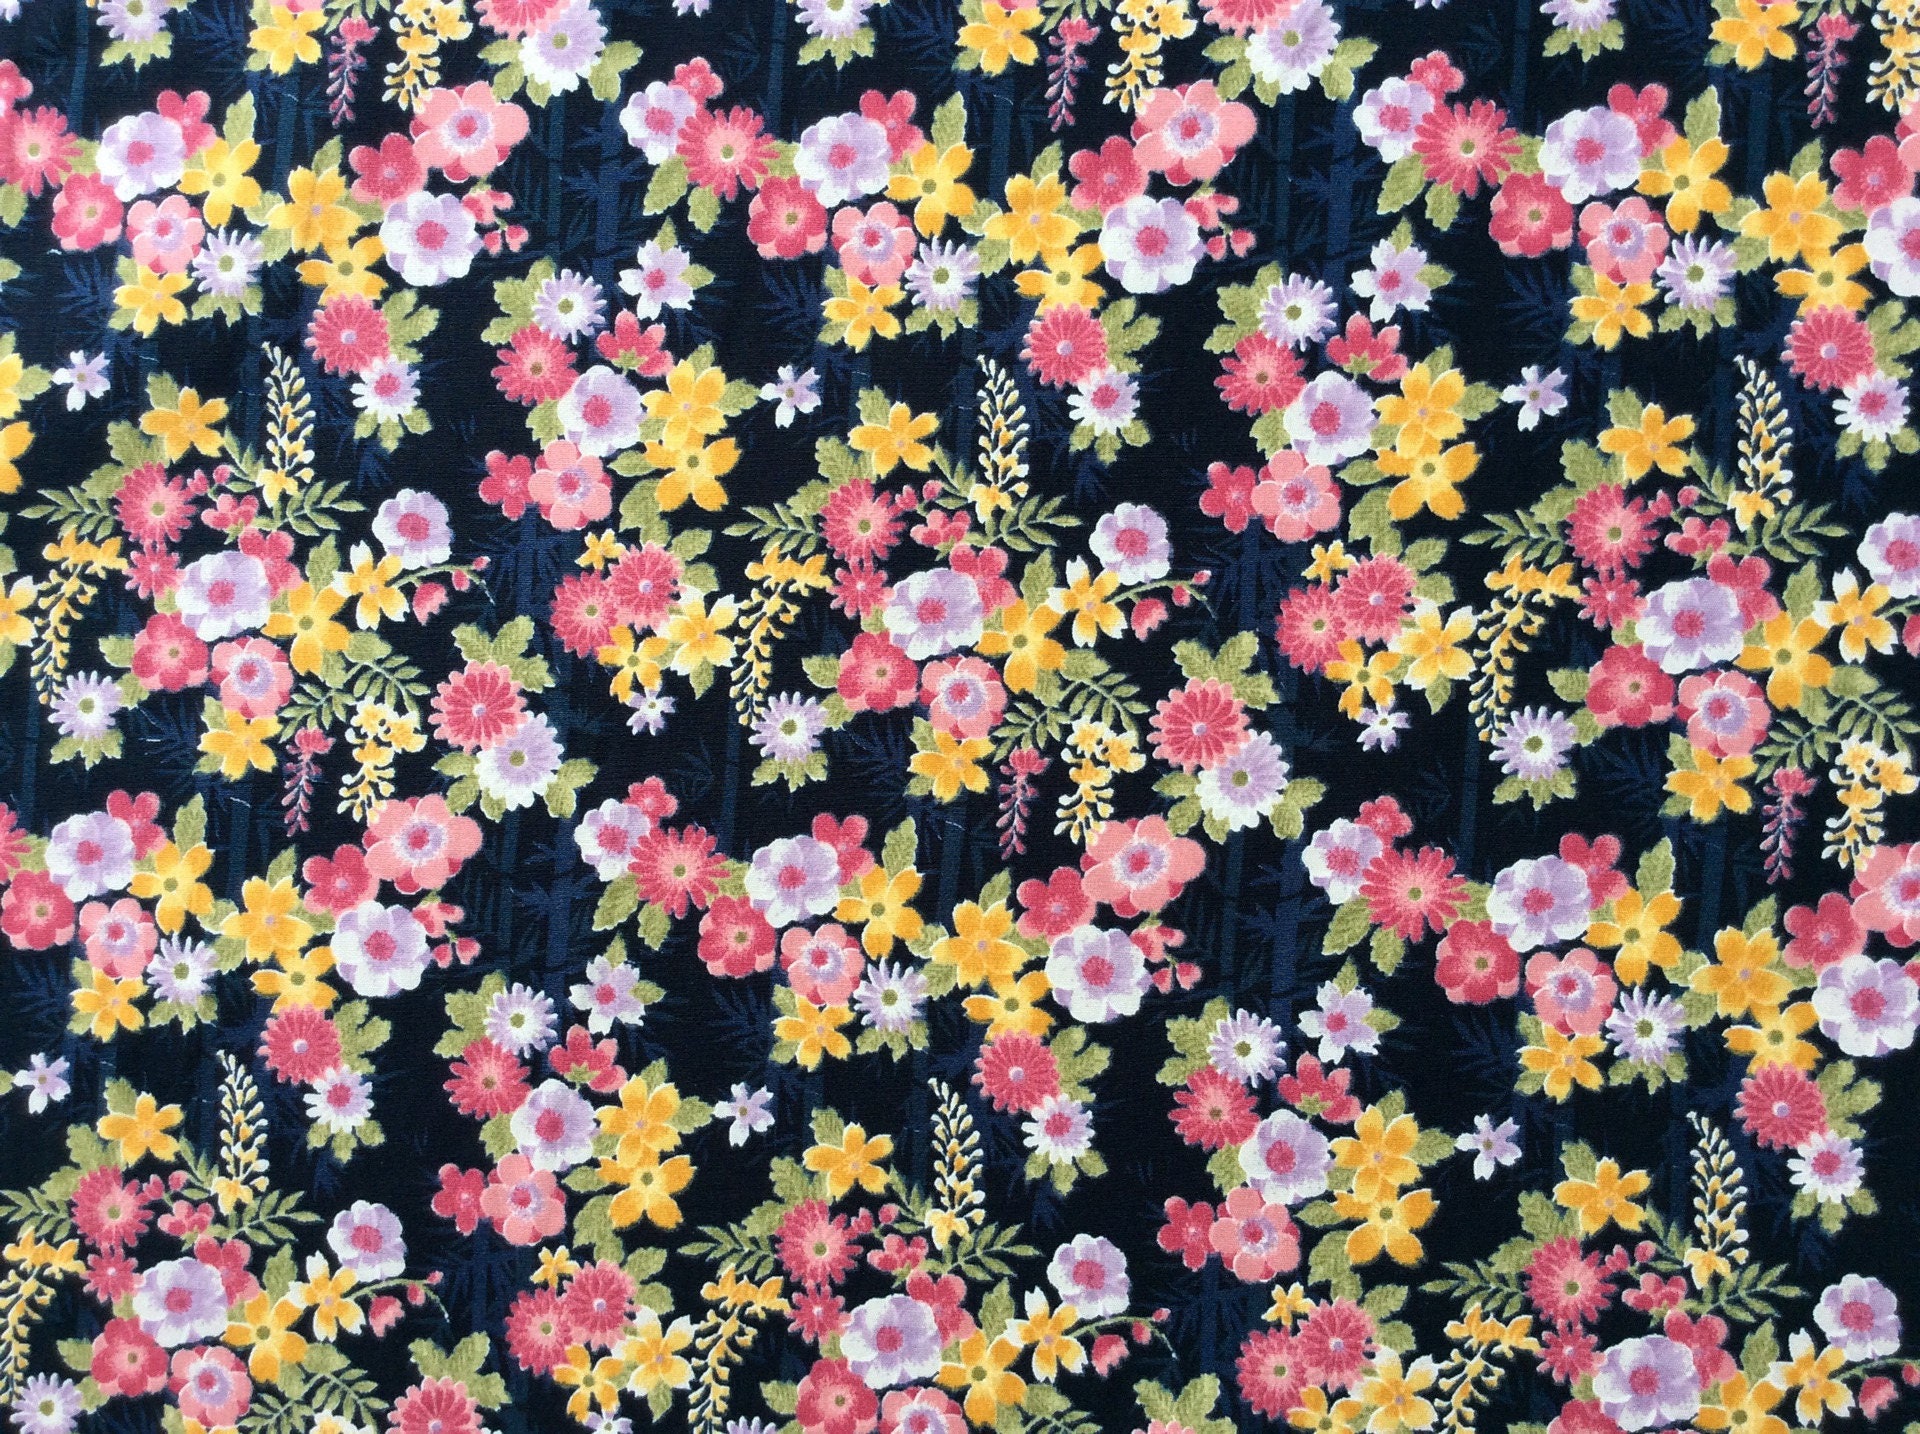 High quality cotton poplin printed in Japan, navy